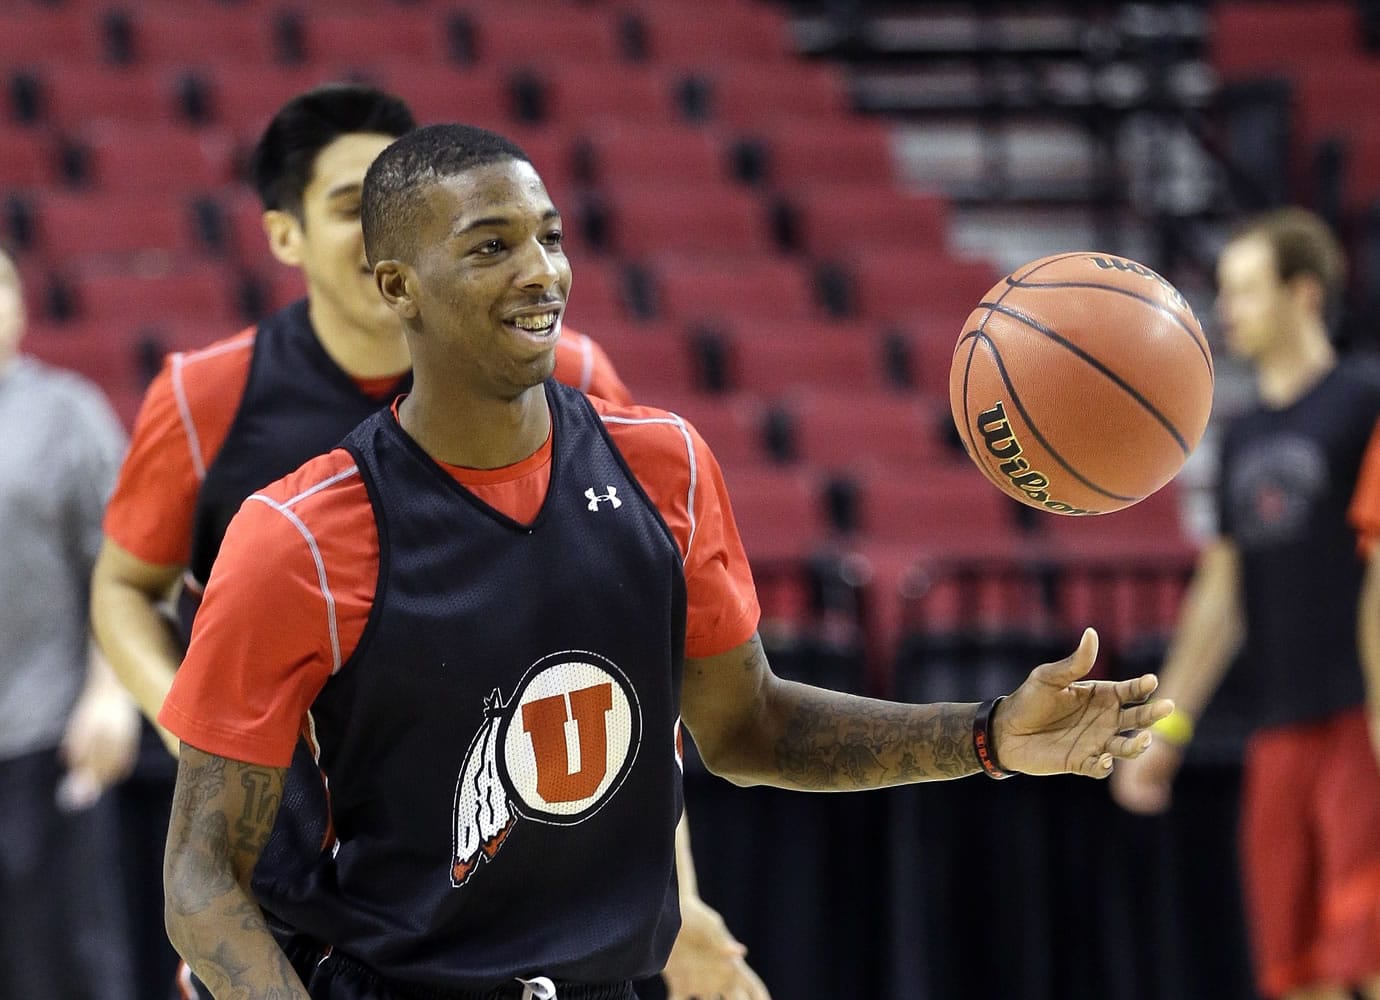 Don Ryan/Associated Press
Utah guard Delon Wright, brother of the Blazers' Dorell Wright, practices at the Moda Center for the Utes' NCAA Tournament game Thursday vs. Stephen F. Austion